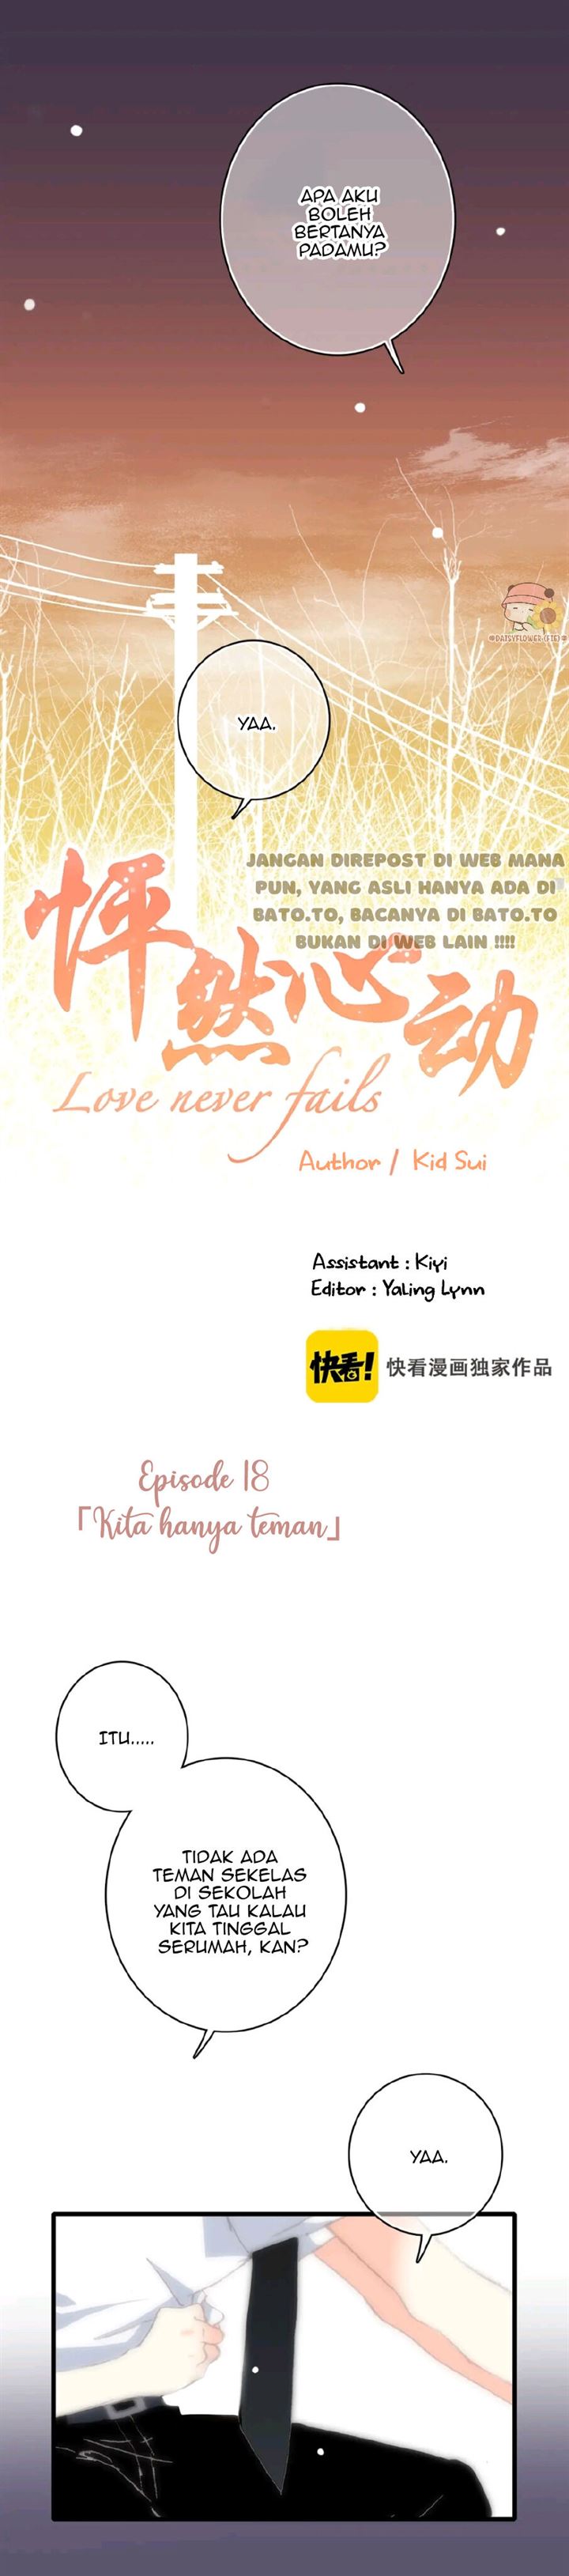 Love Never Fails Chapter 18